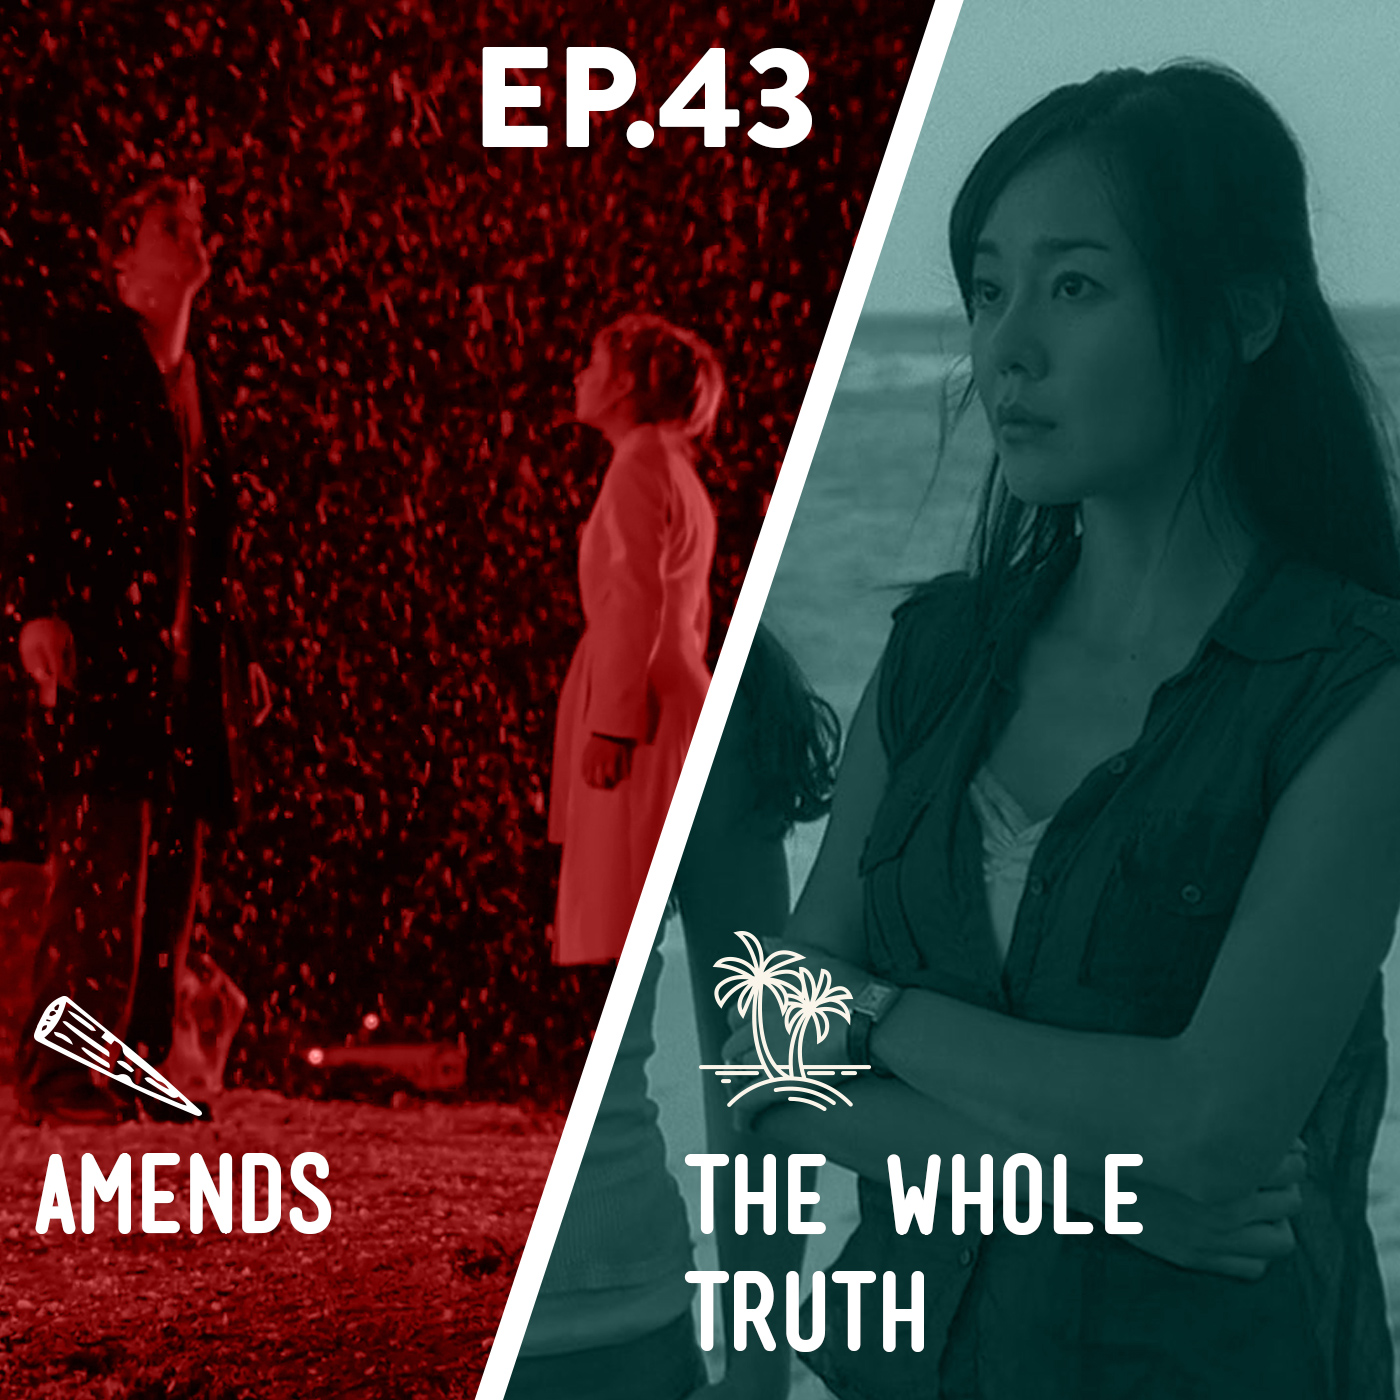 43 - Amends / The Whole Truth